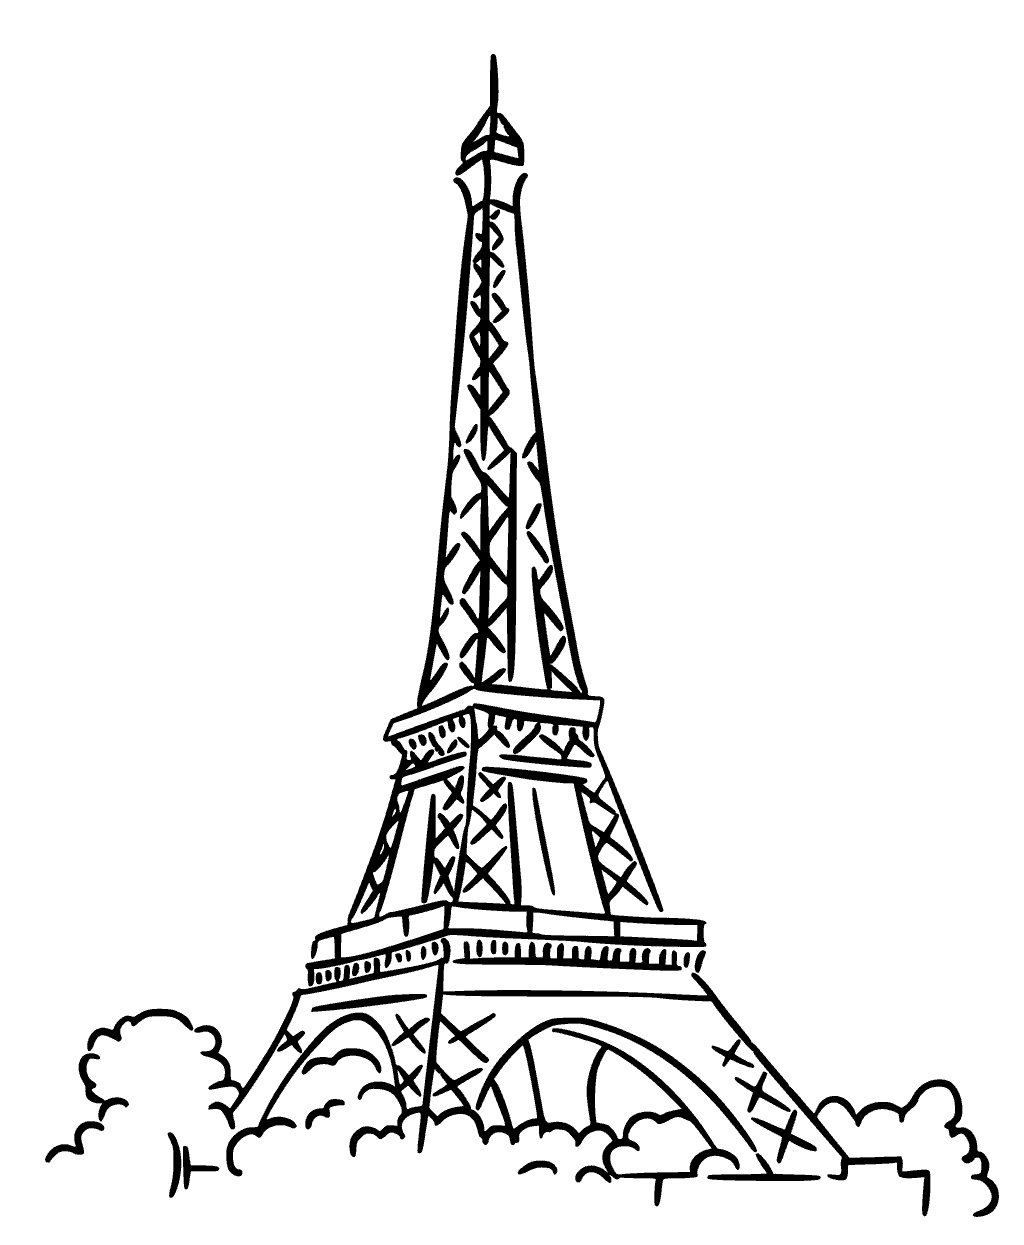 Eiffel Tower Coloring Page At GetColorings Free Printable Colorings Pages To Print And Color